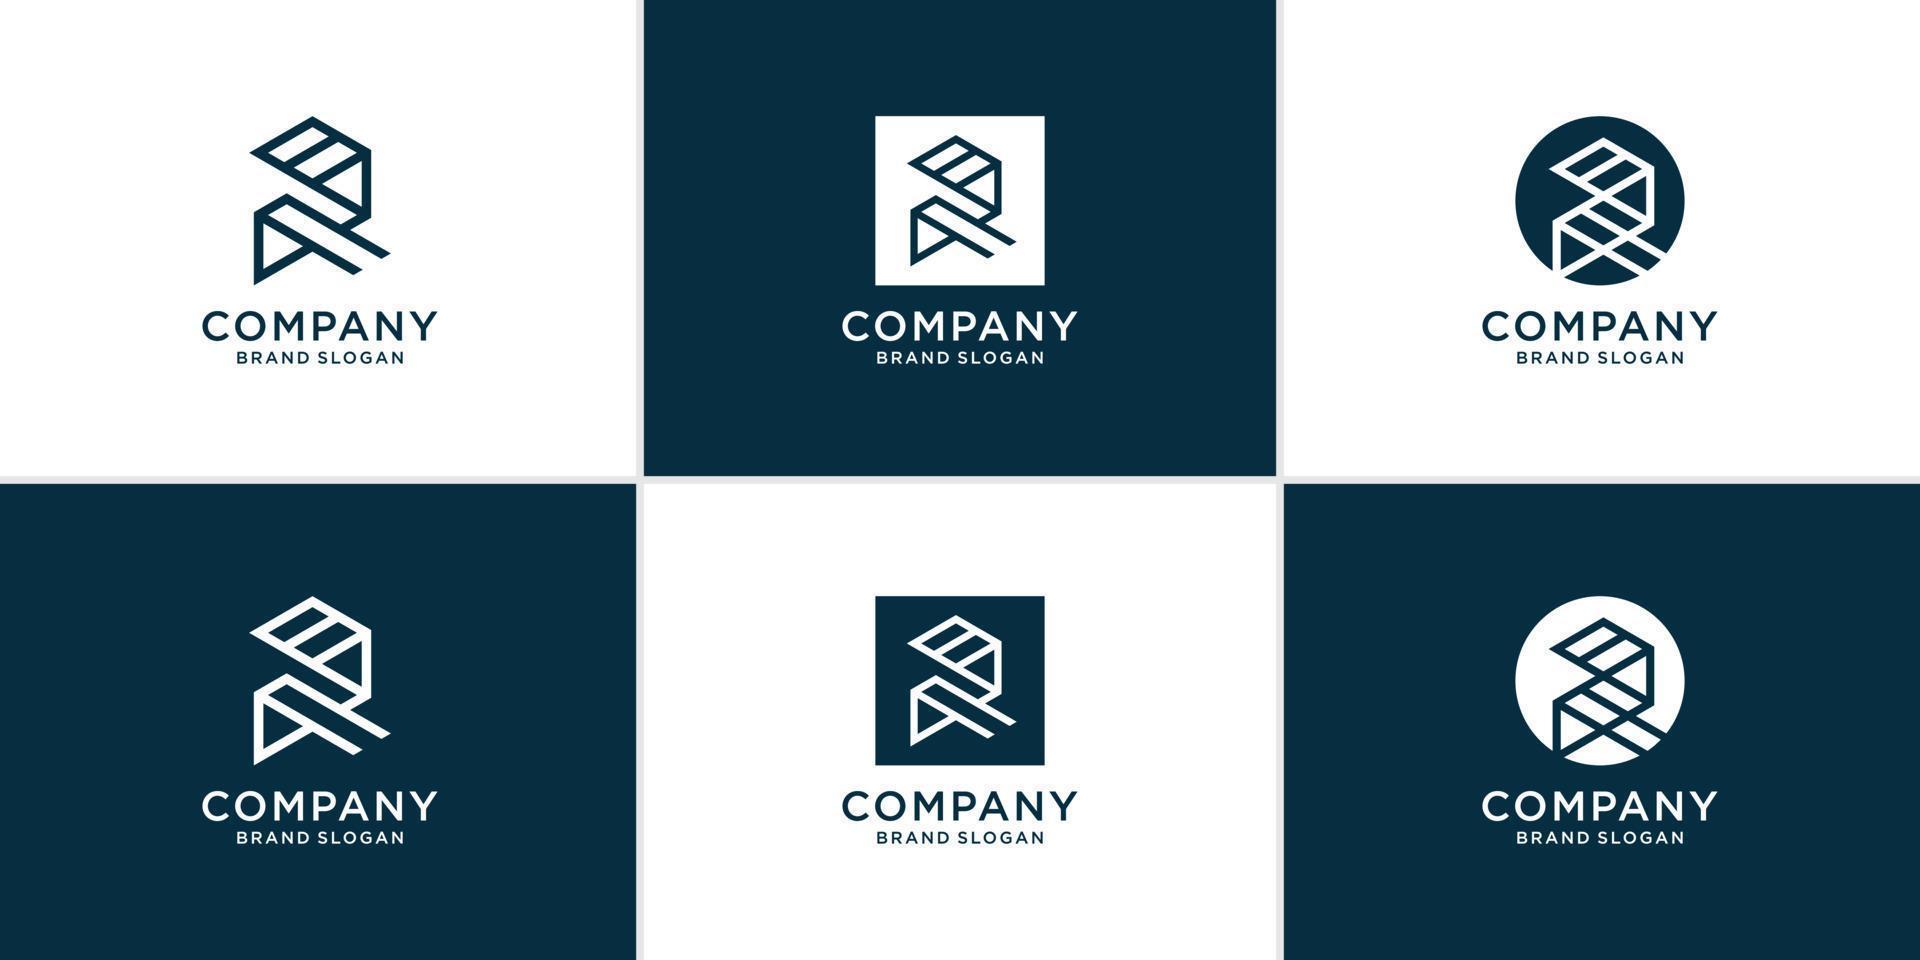 Letter R logo collection with creative modern style Premium Vector